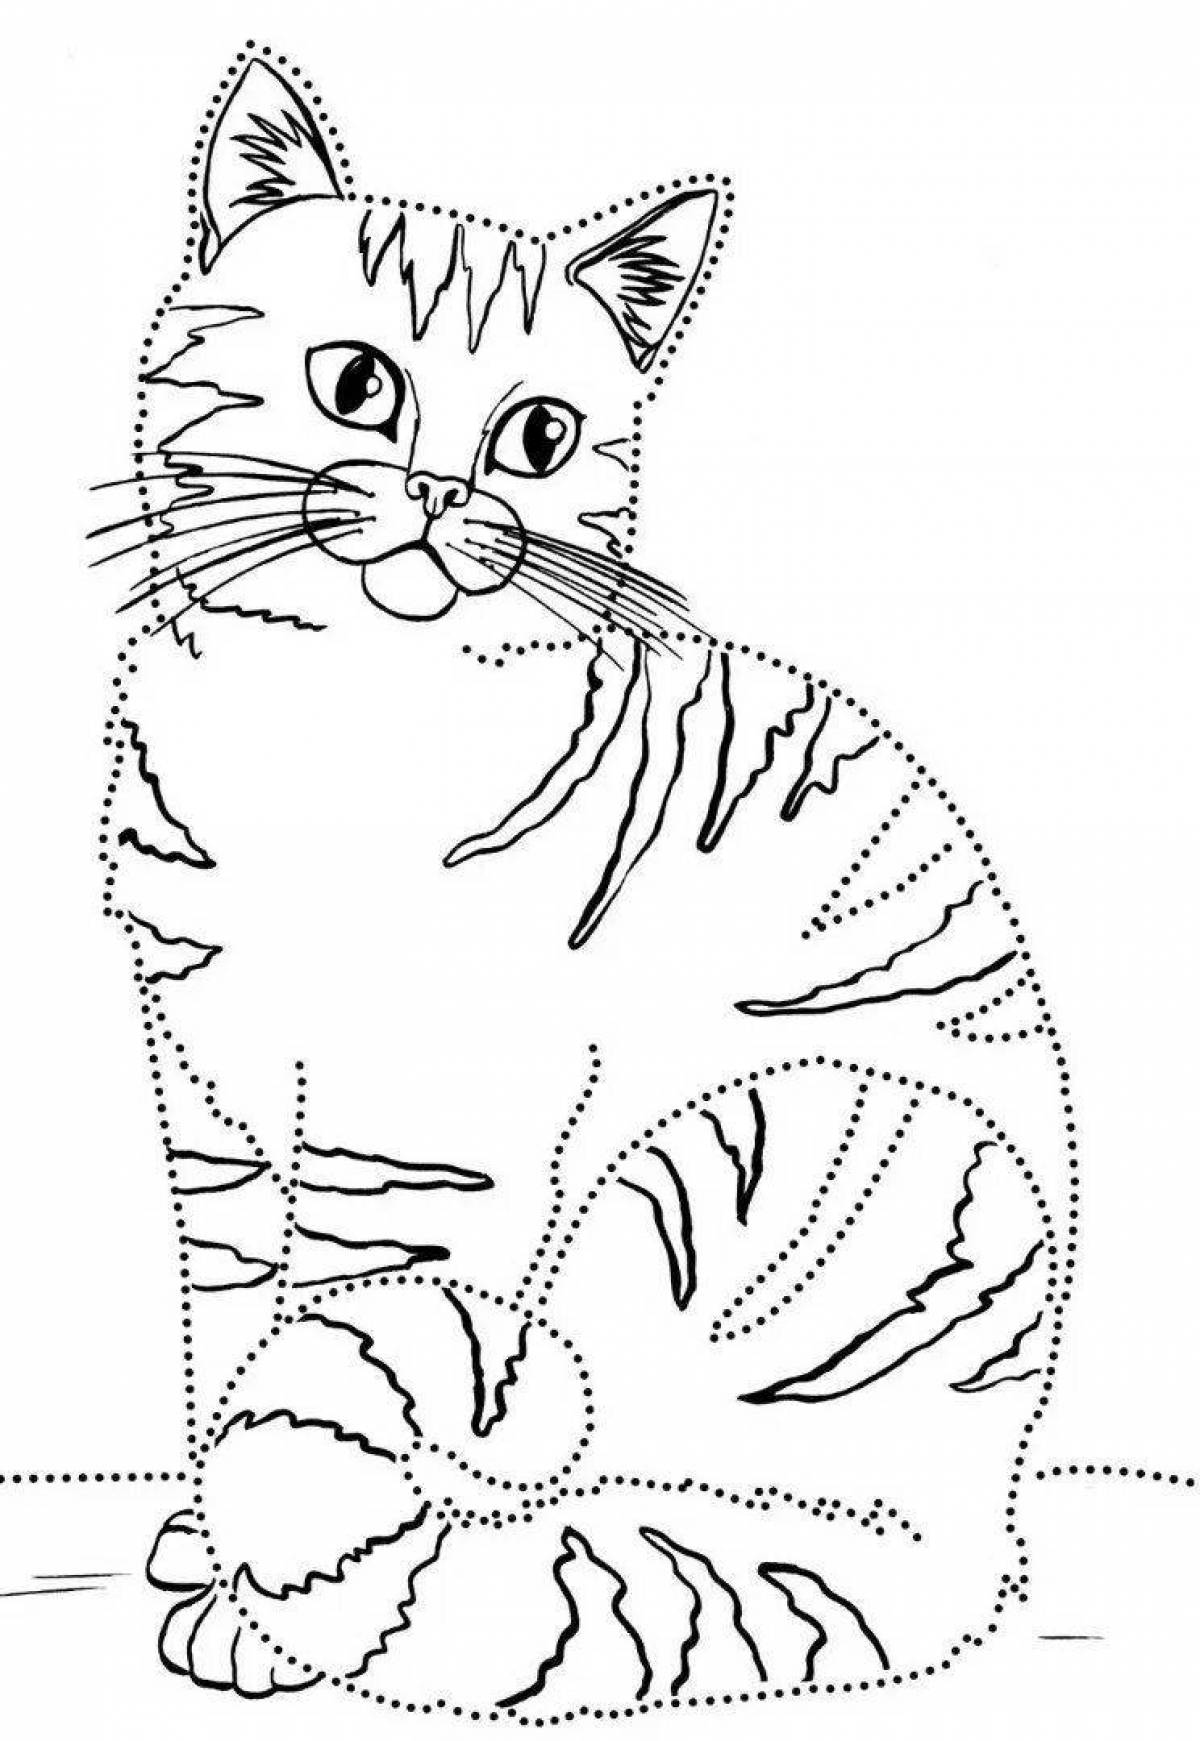 Glorious kitty coloring book for kids 5-6 years old